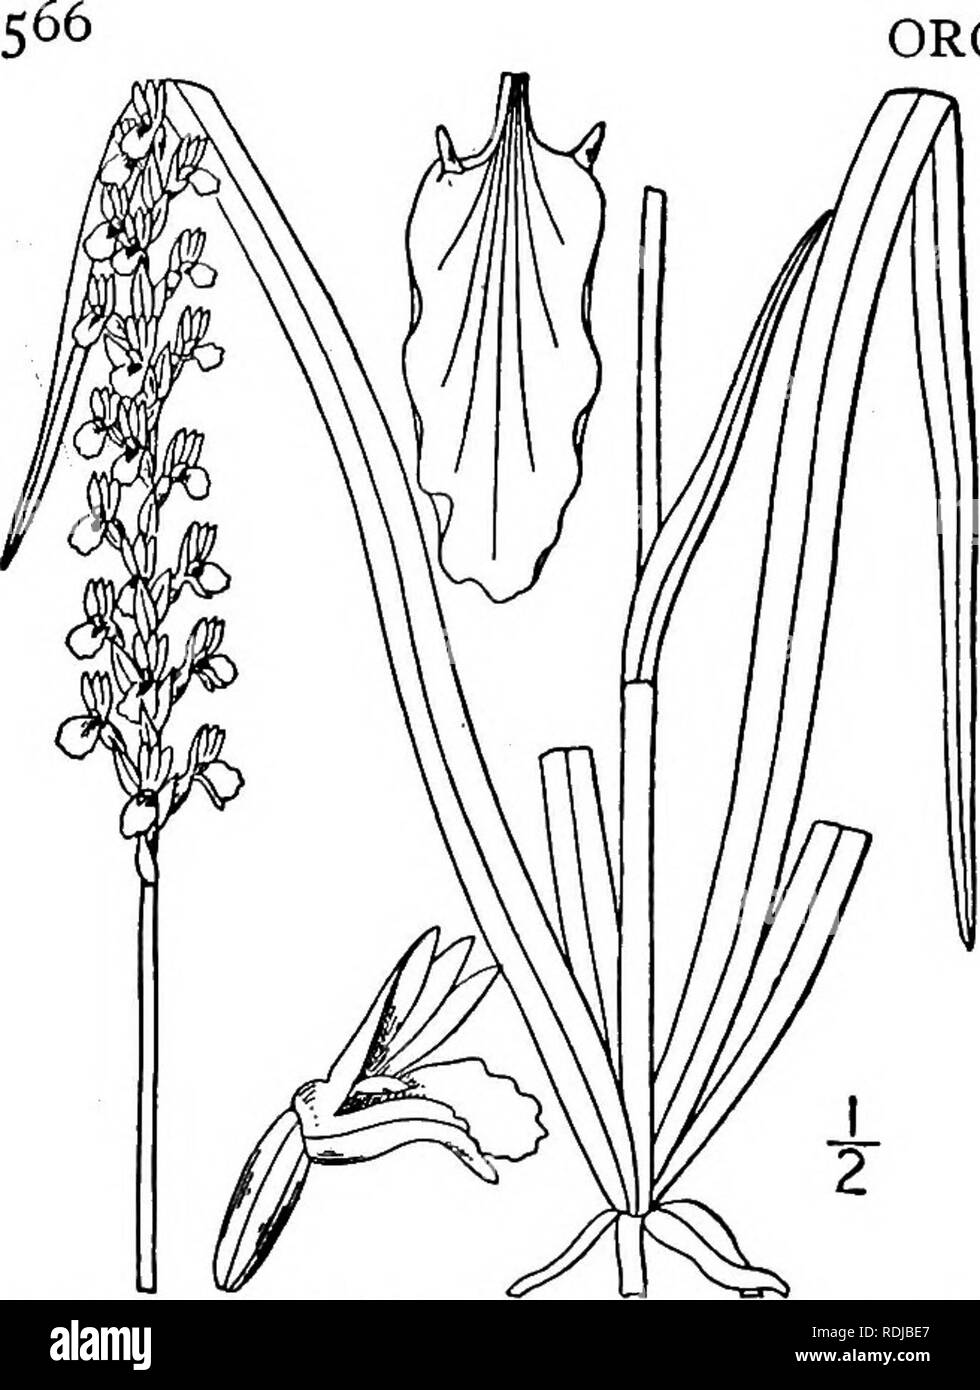 . An illustrated flora of the northern United States, Canada and the British possessions, from Newfoundland to the parallel of the southern boundary of Virginia, and from the Atlantic Ocean westward to the 102d meridian. Botany; Botany. ORCHIDACEAE. Vol. I. 6. Ibidiumpraecox (Walt.) House. Grass- leaved Ladies'-tresses. Fig. 1394. Limodorum praecox Walt. Fl. Car. 221. 1788. Spiranthes graminea var. Walteri A. Gray, Man. Ed. 5, 505. 1867. Spiranthes praecox S. Wats, in A. Gray, Man. Ed. 6, 503. 1890. G. praecox Kuntze, Rev. Gen. PI. 663. 1891. Ibidium praecox House, Muhlenbergia 1: 129. 1906. S Stock Photo